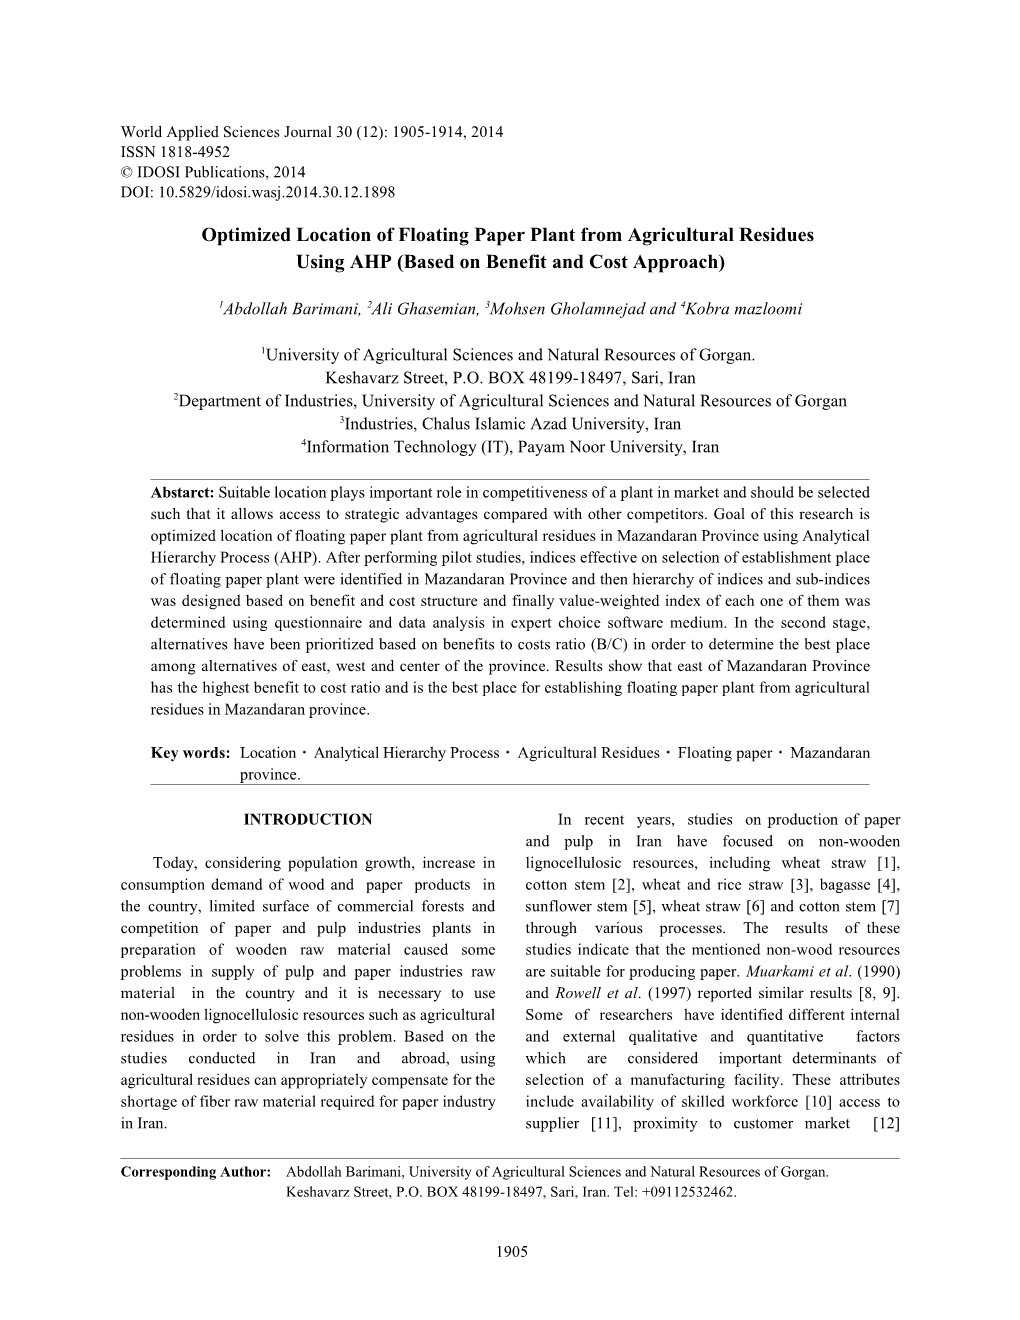 Optimized Location of Floating Paper Plant from Agricultural Residues Using AHP (Based on Benefit and Cost Approach)